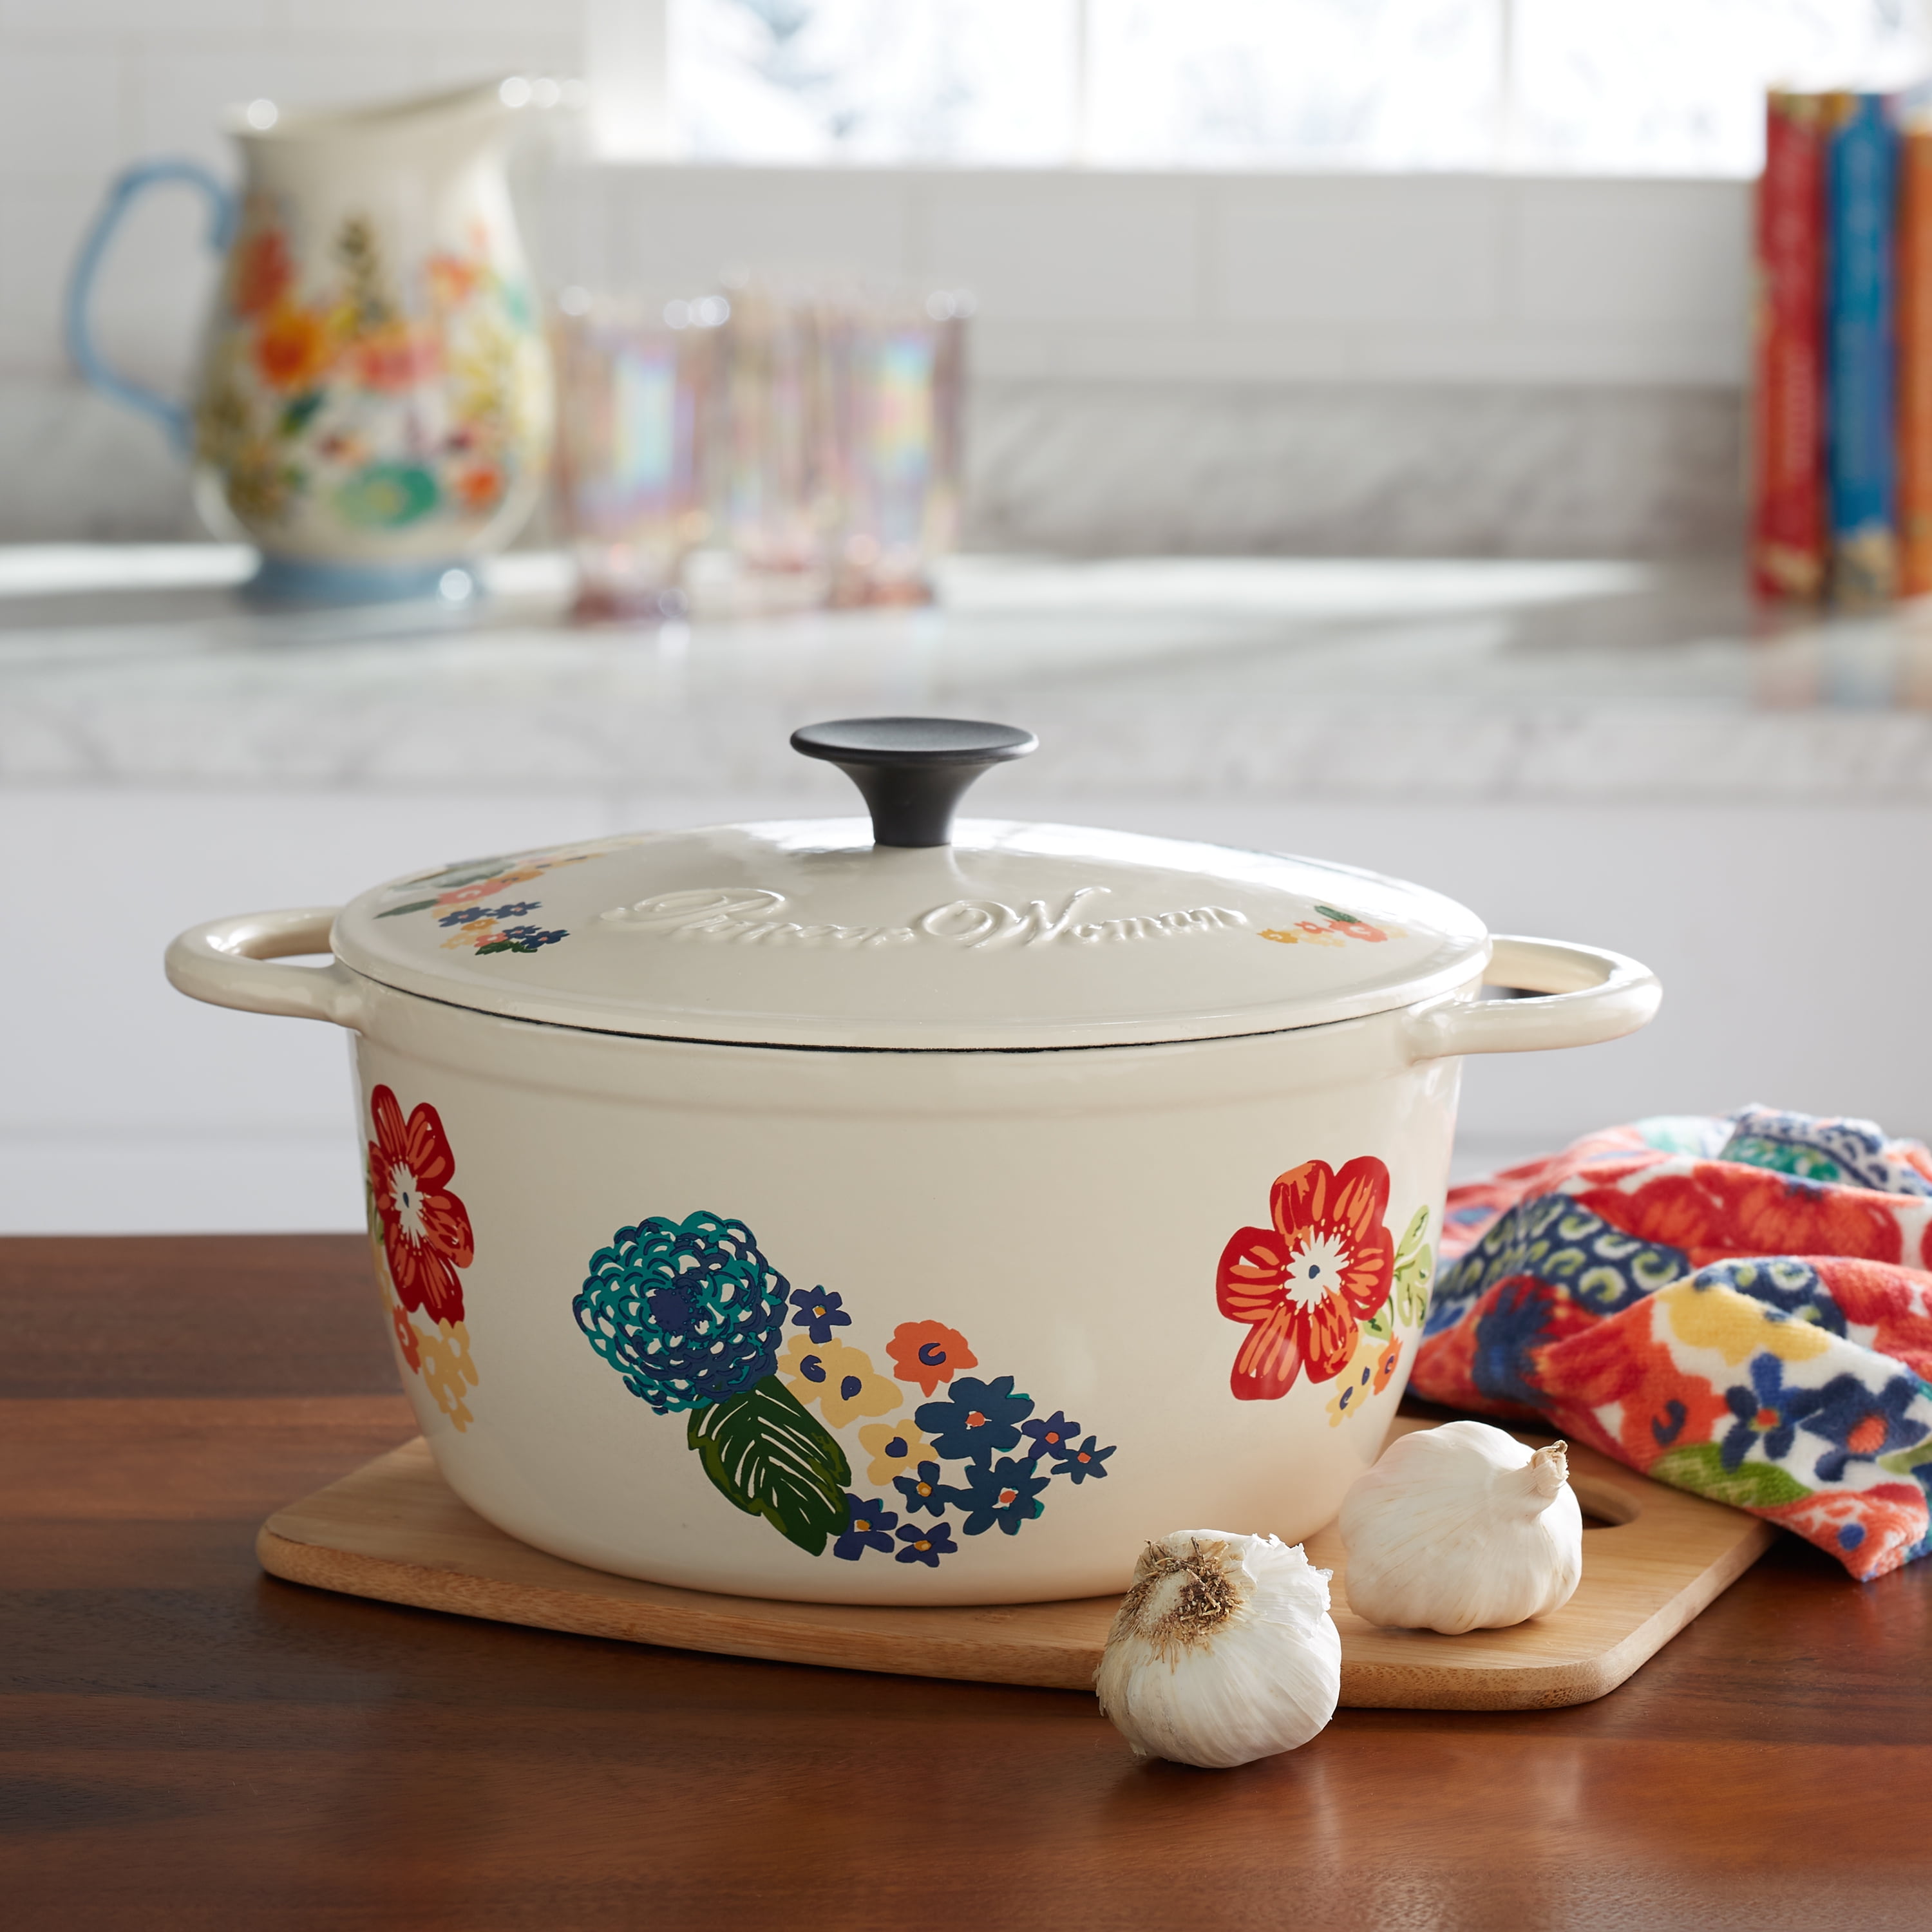 THE PIONEER WOMAN CHEERFUL ROSE ENAMEL ON STEEL DUTCH OVEN WITH